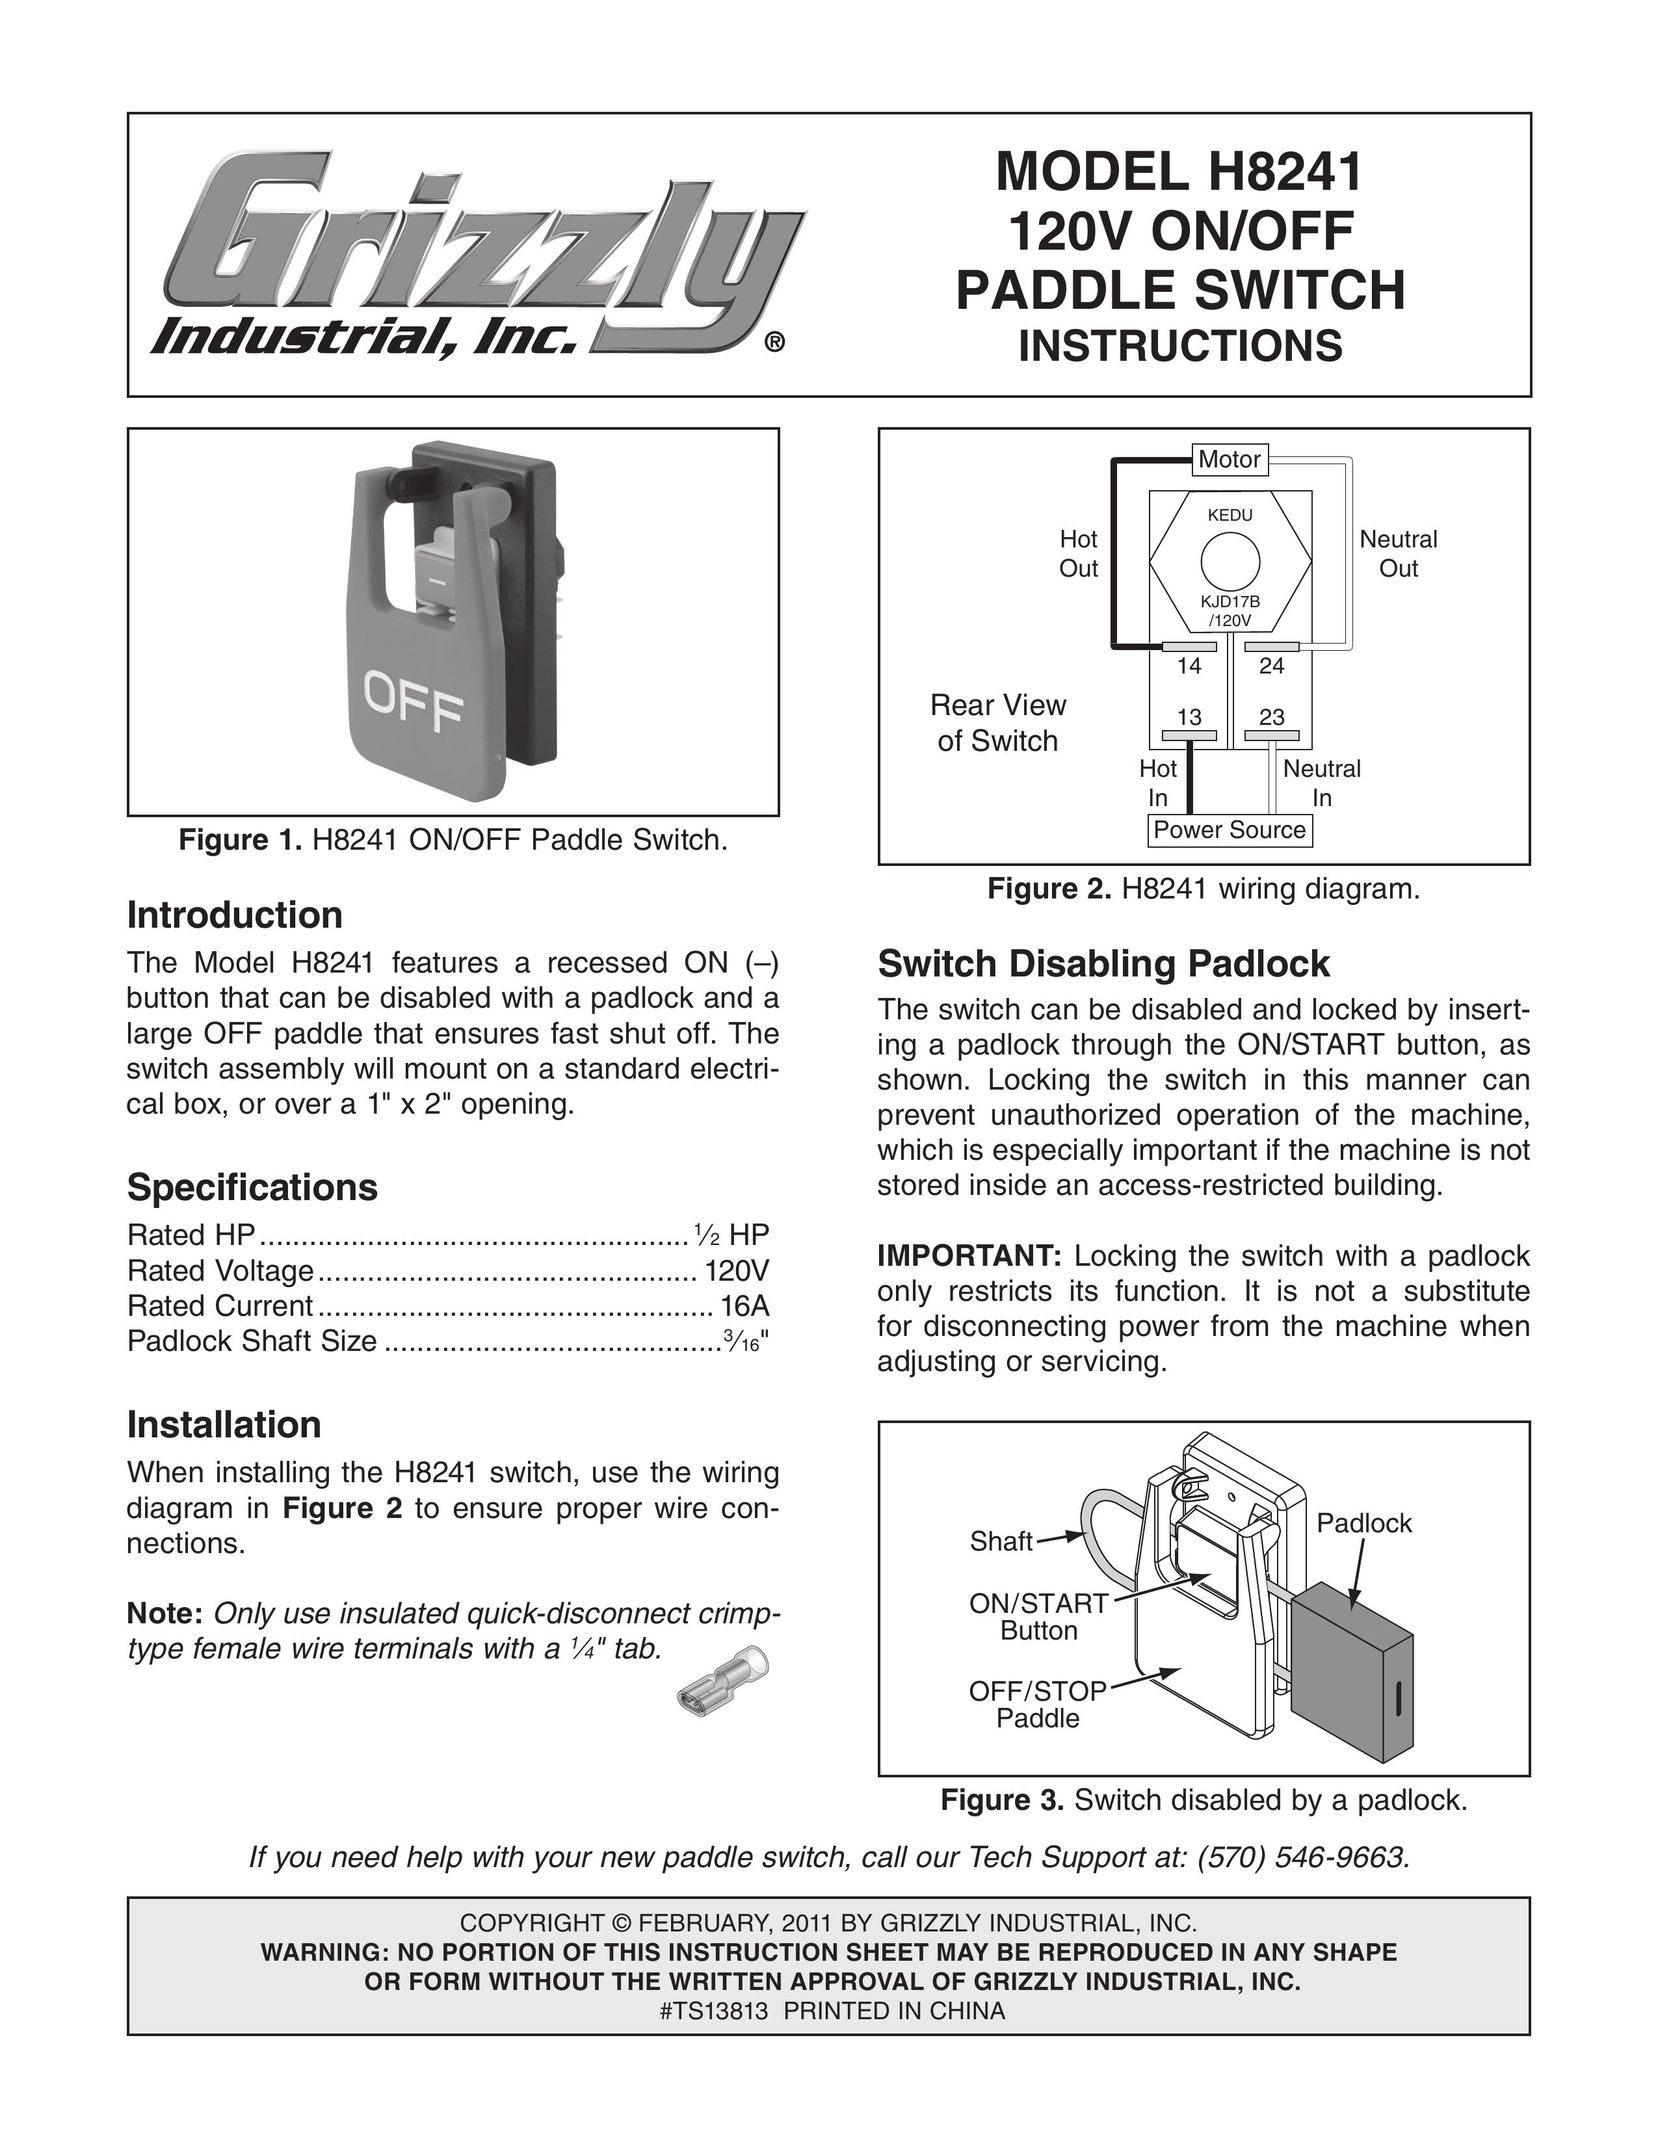 Grizzly H8241 Home Safety Product User Manual